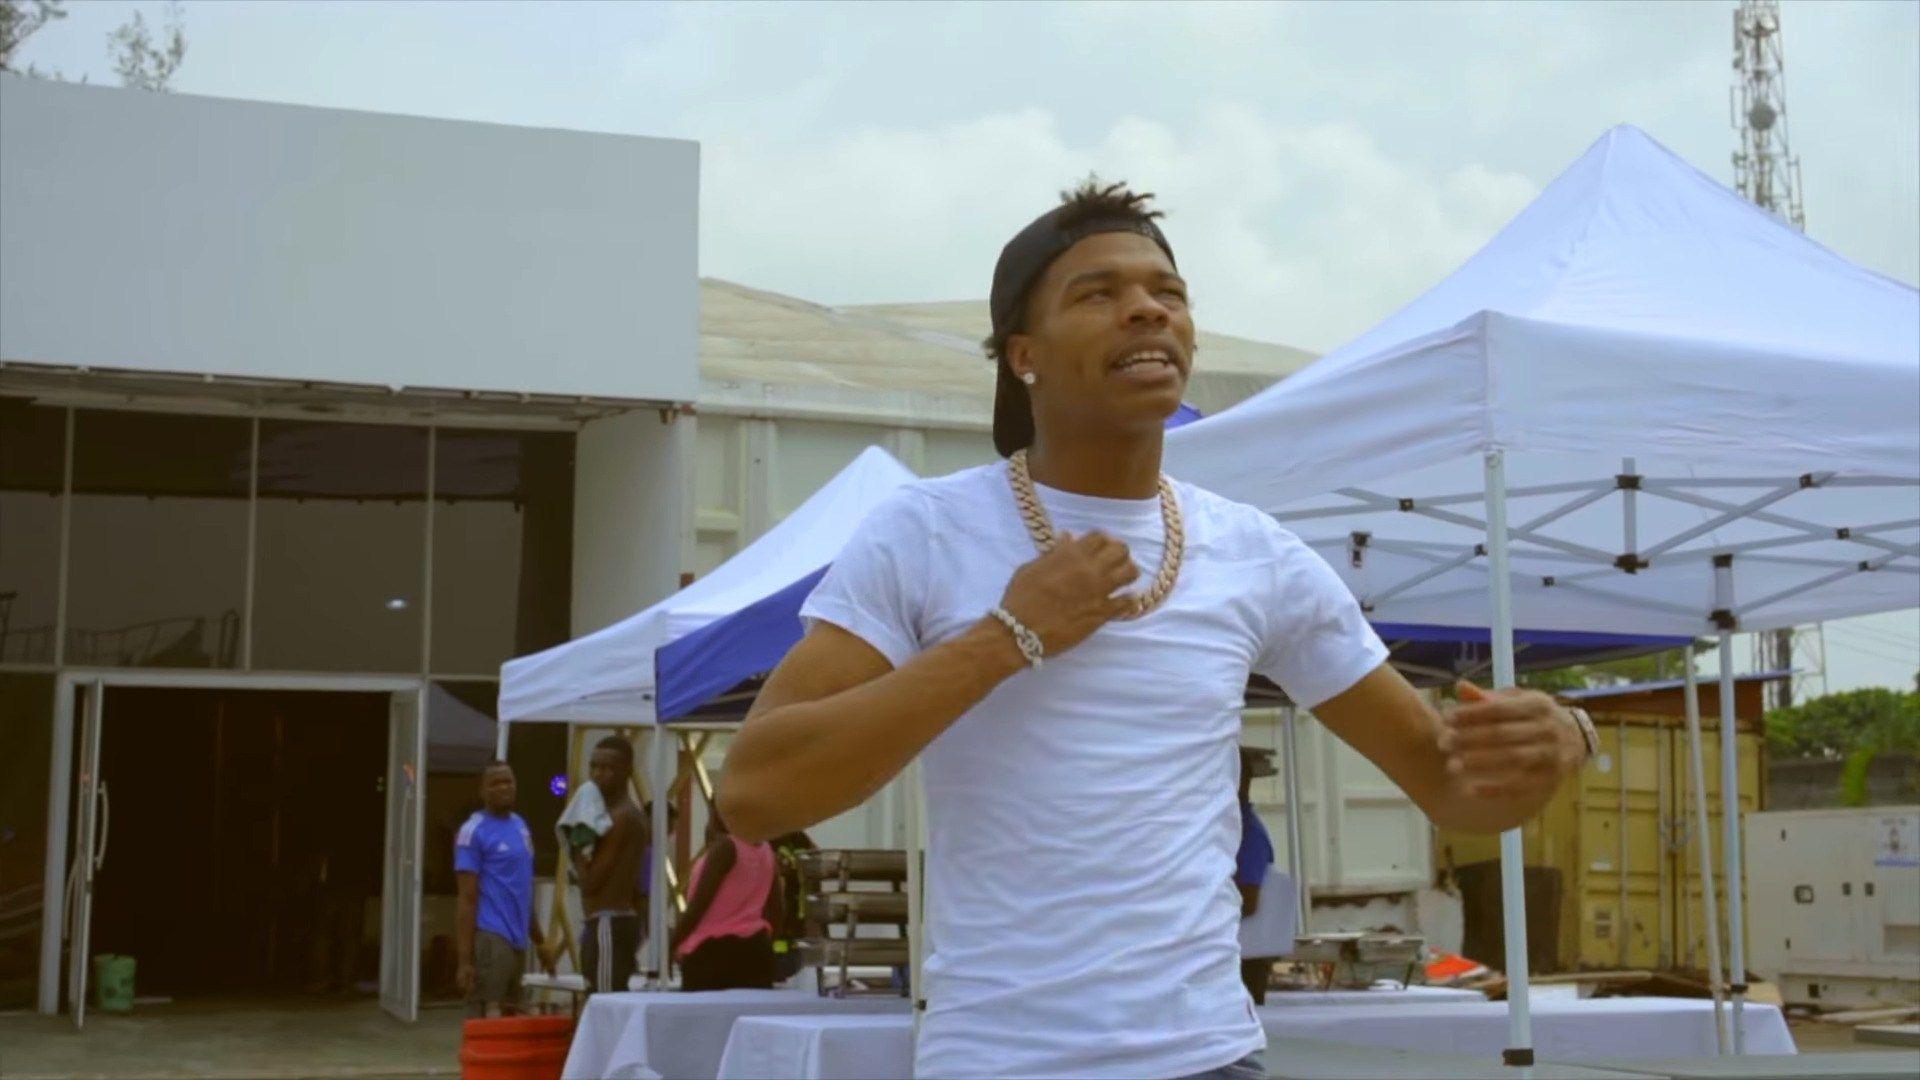 Download Mp4 Video: Lil Baby